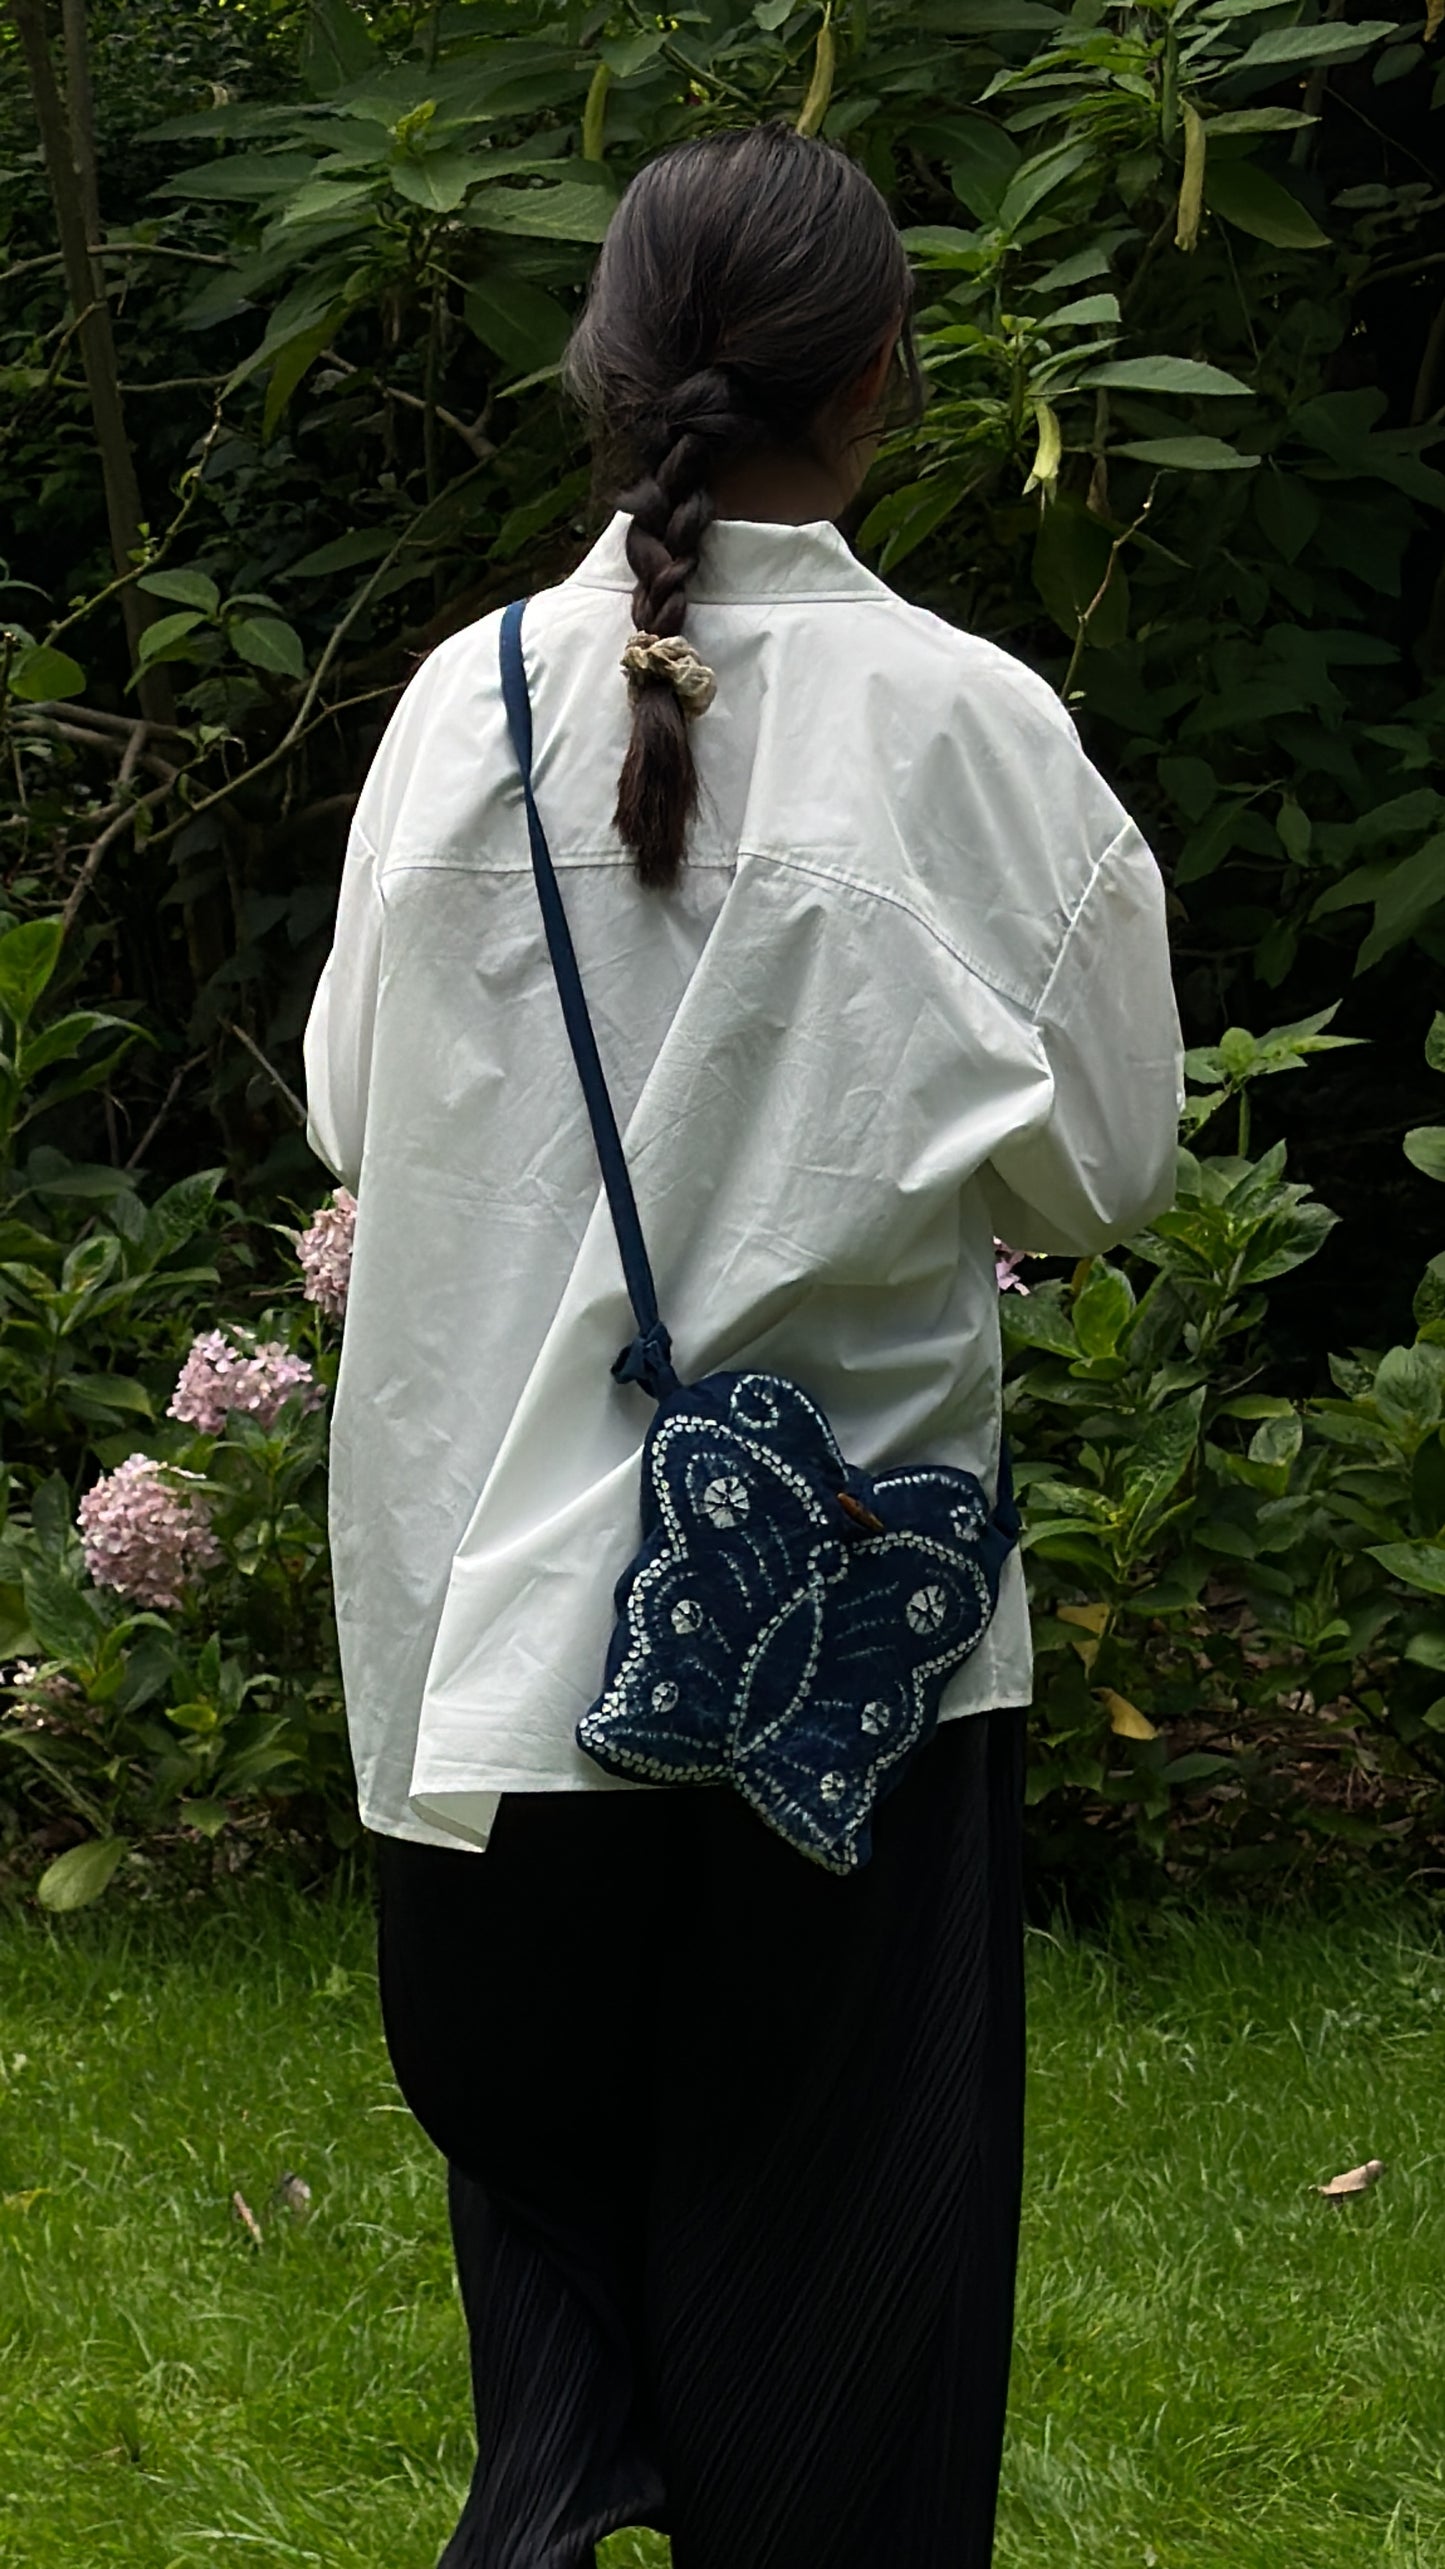 A beautiful indigo dye butterfly art sling bag / crossbody bag with a feeling of innocence. Unique accessories for your ootd!